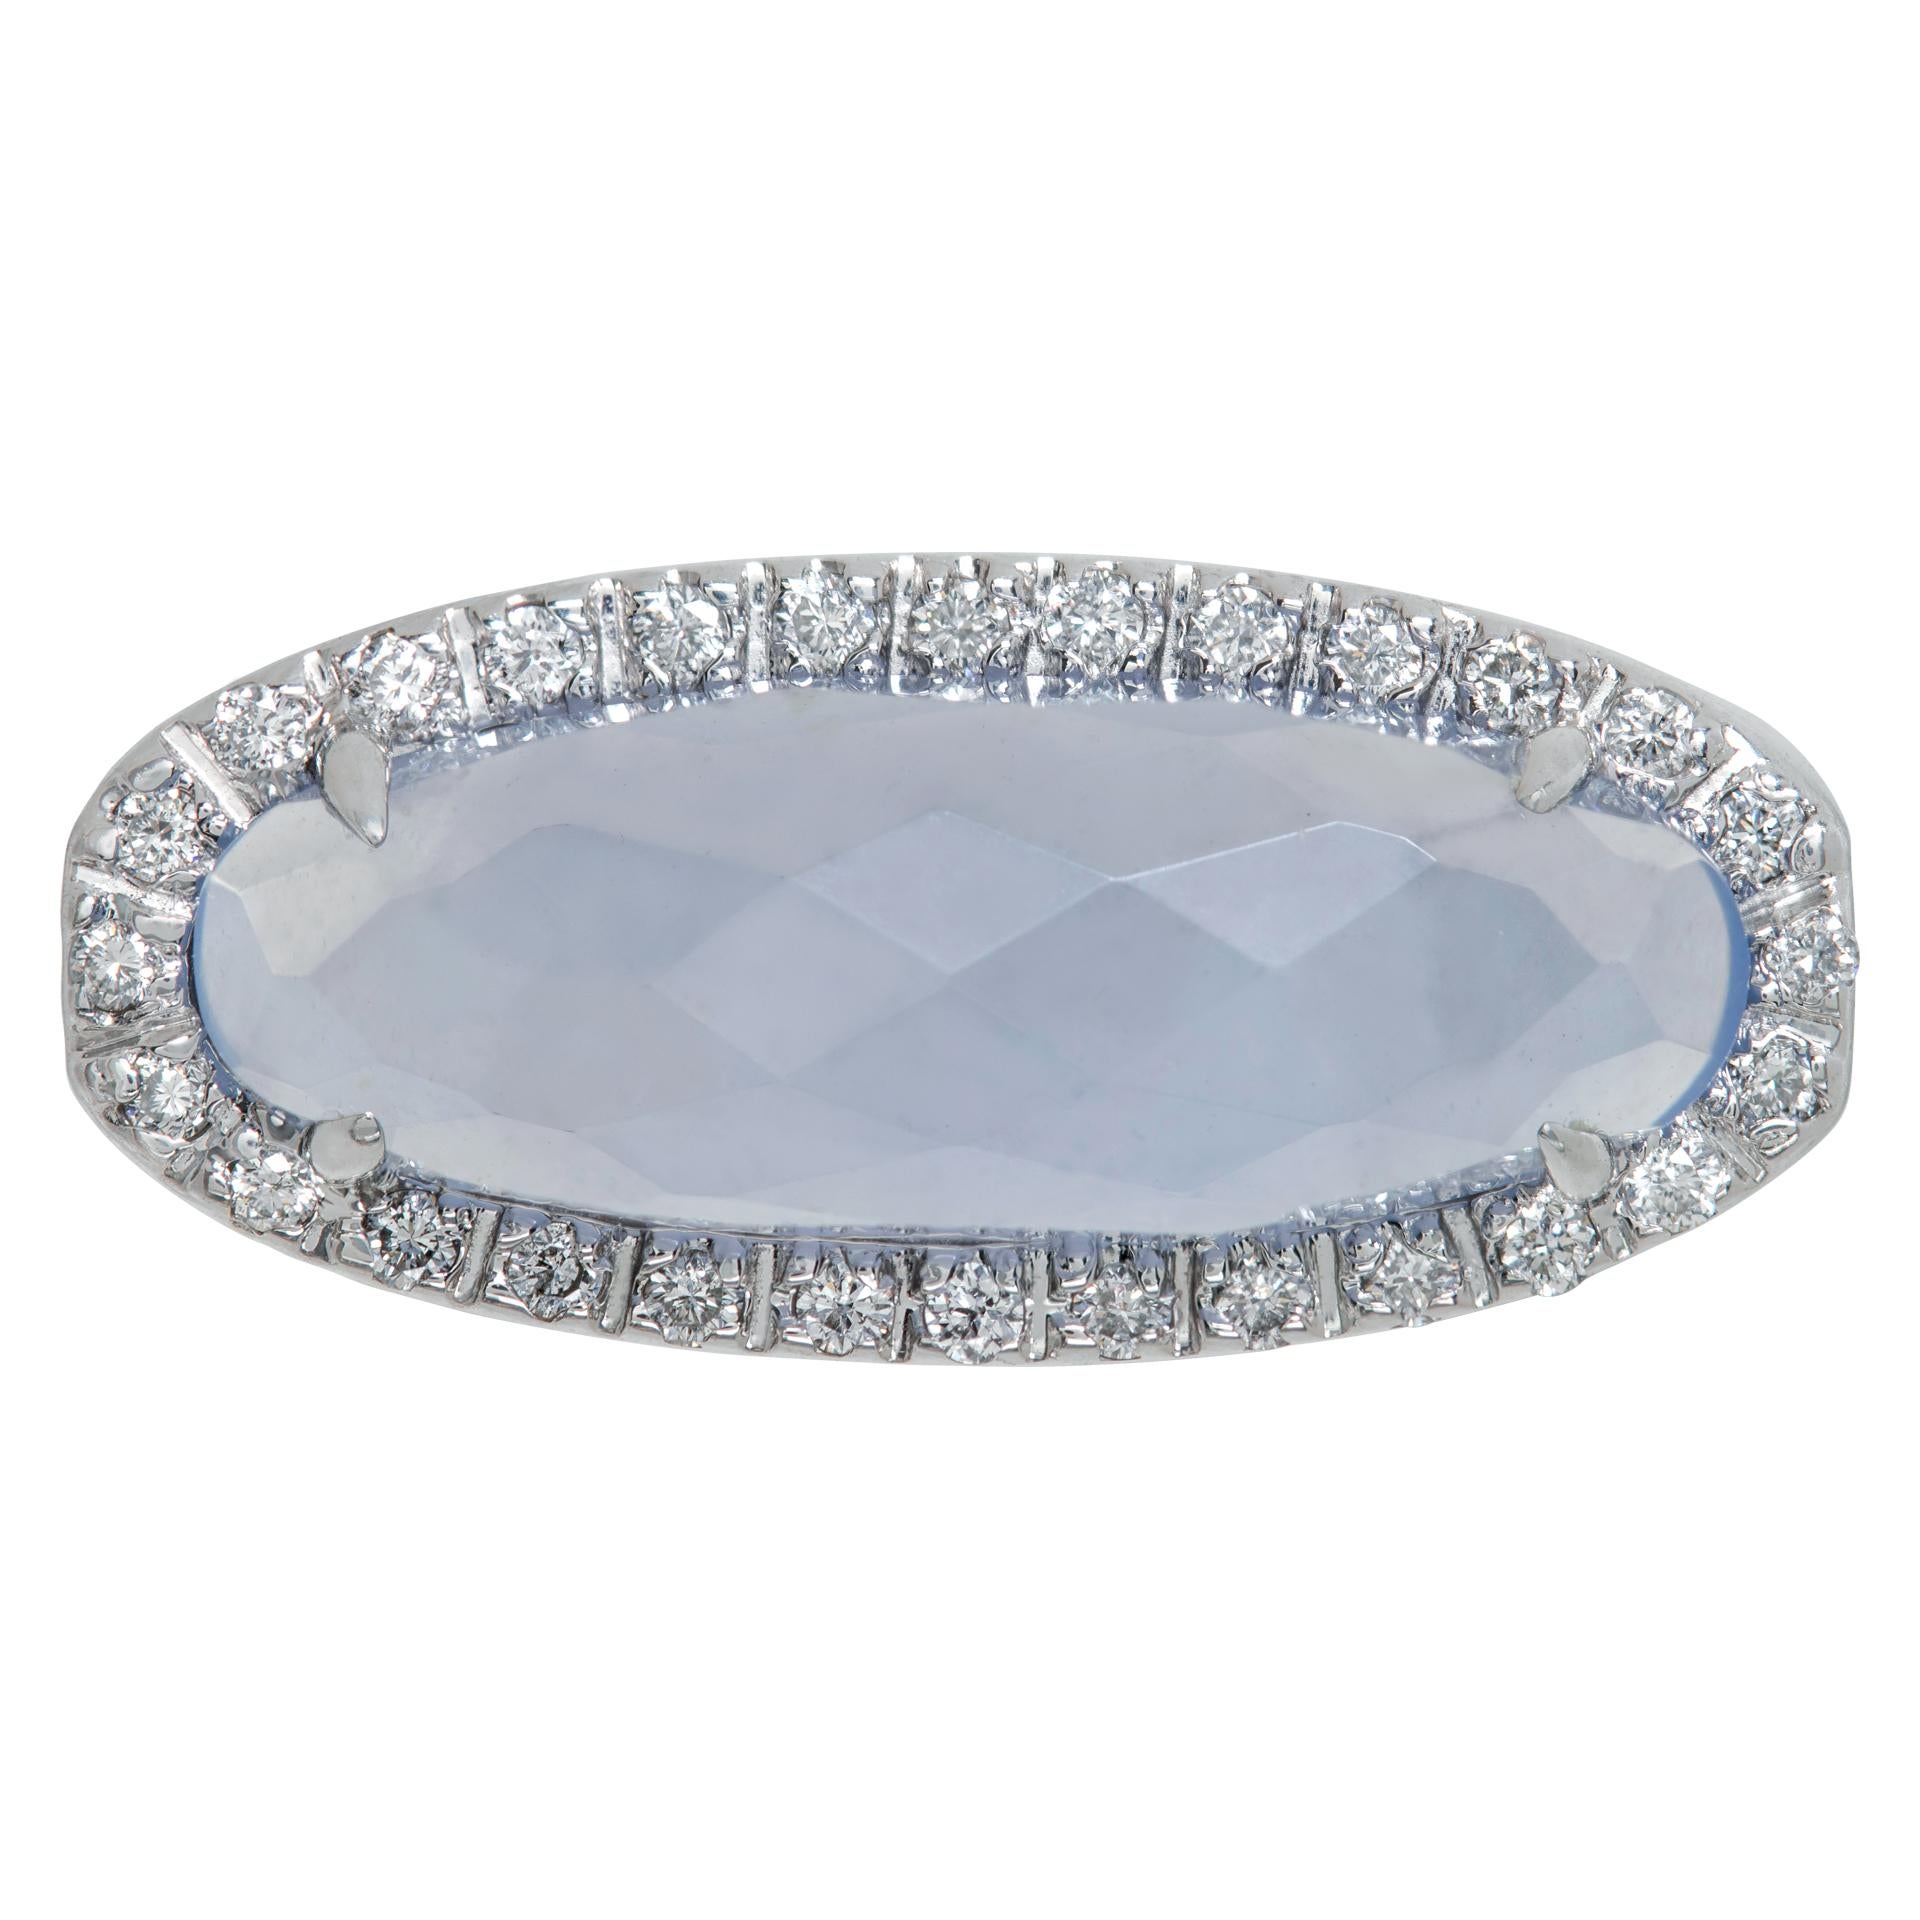 Oval Faceted Ring with approx. 0.50 ct of diamonds bezel mounted around center Chalcedony in 14k white gold. Size 6.

This Diamond ring is currently size 6 and some items can be sized up or down, please ask! It weighs 4.5 pennyweights and is 14k.